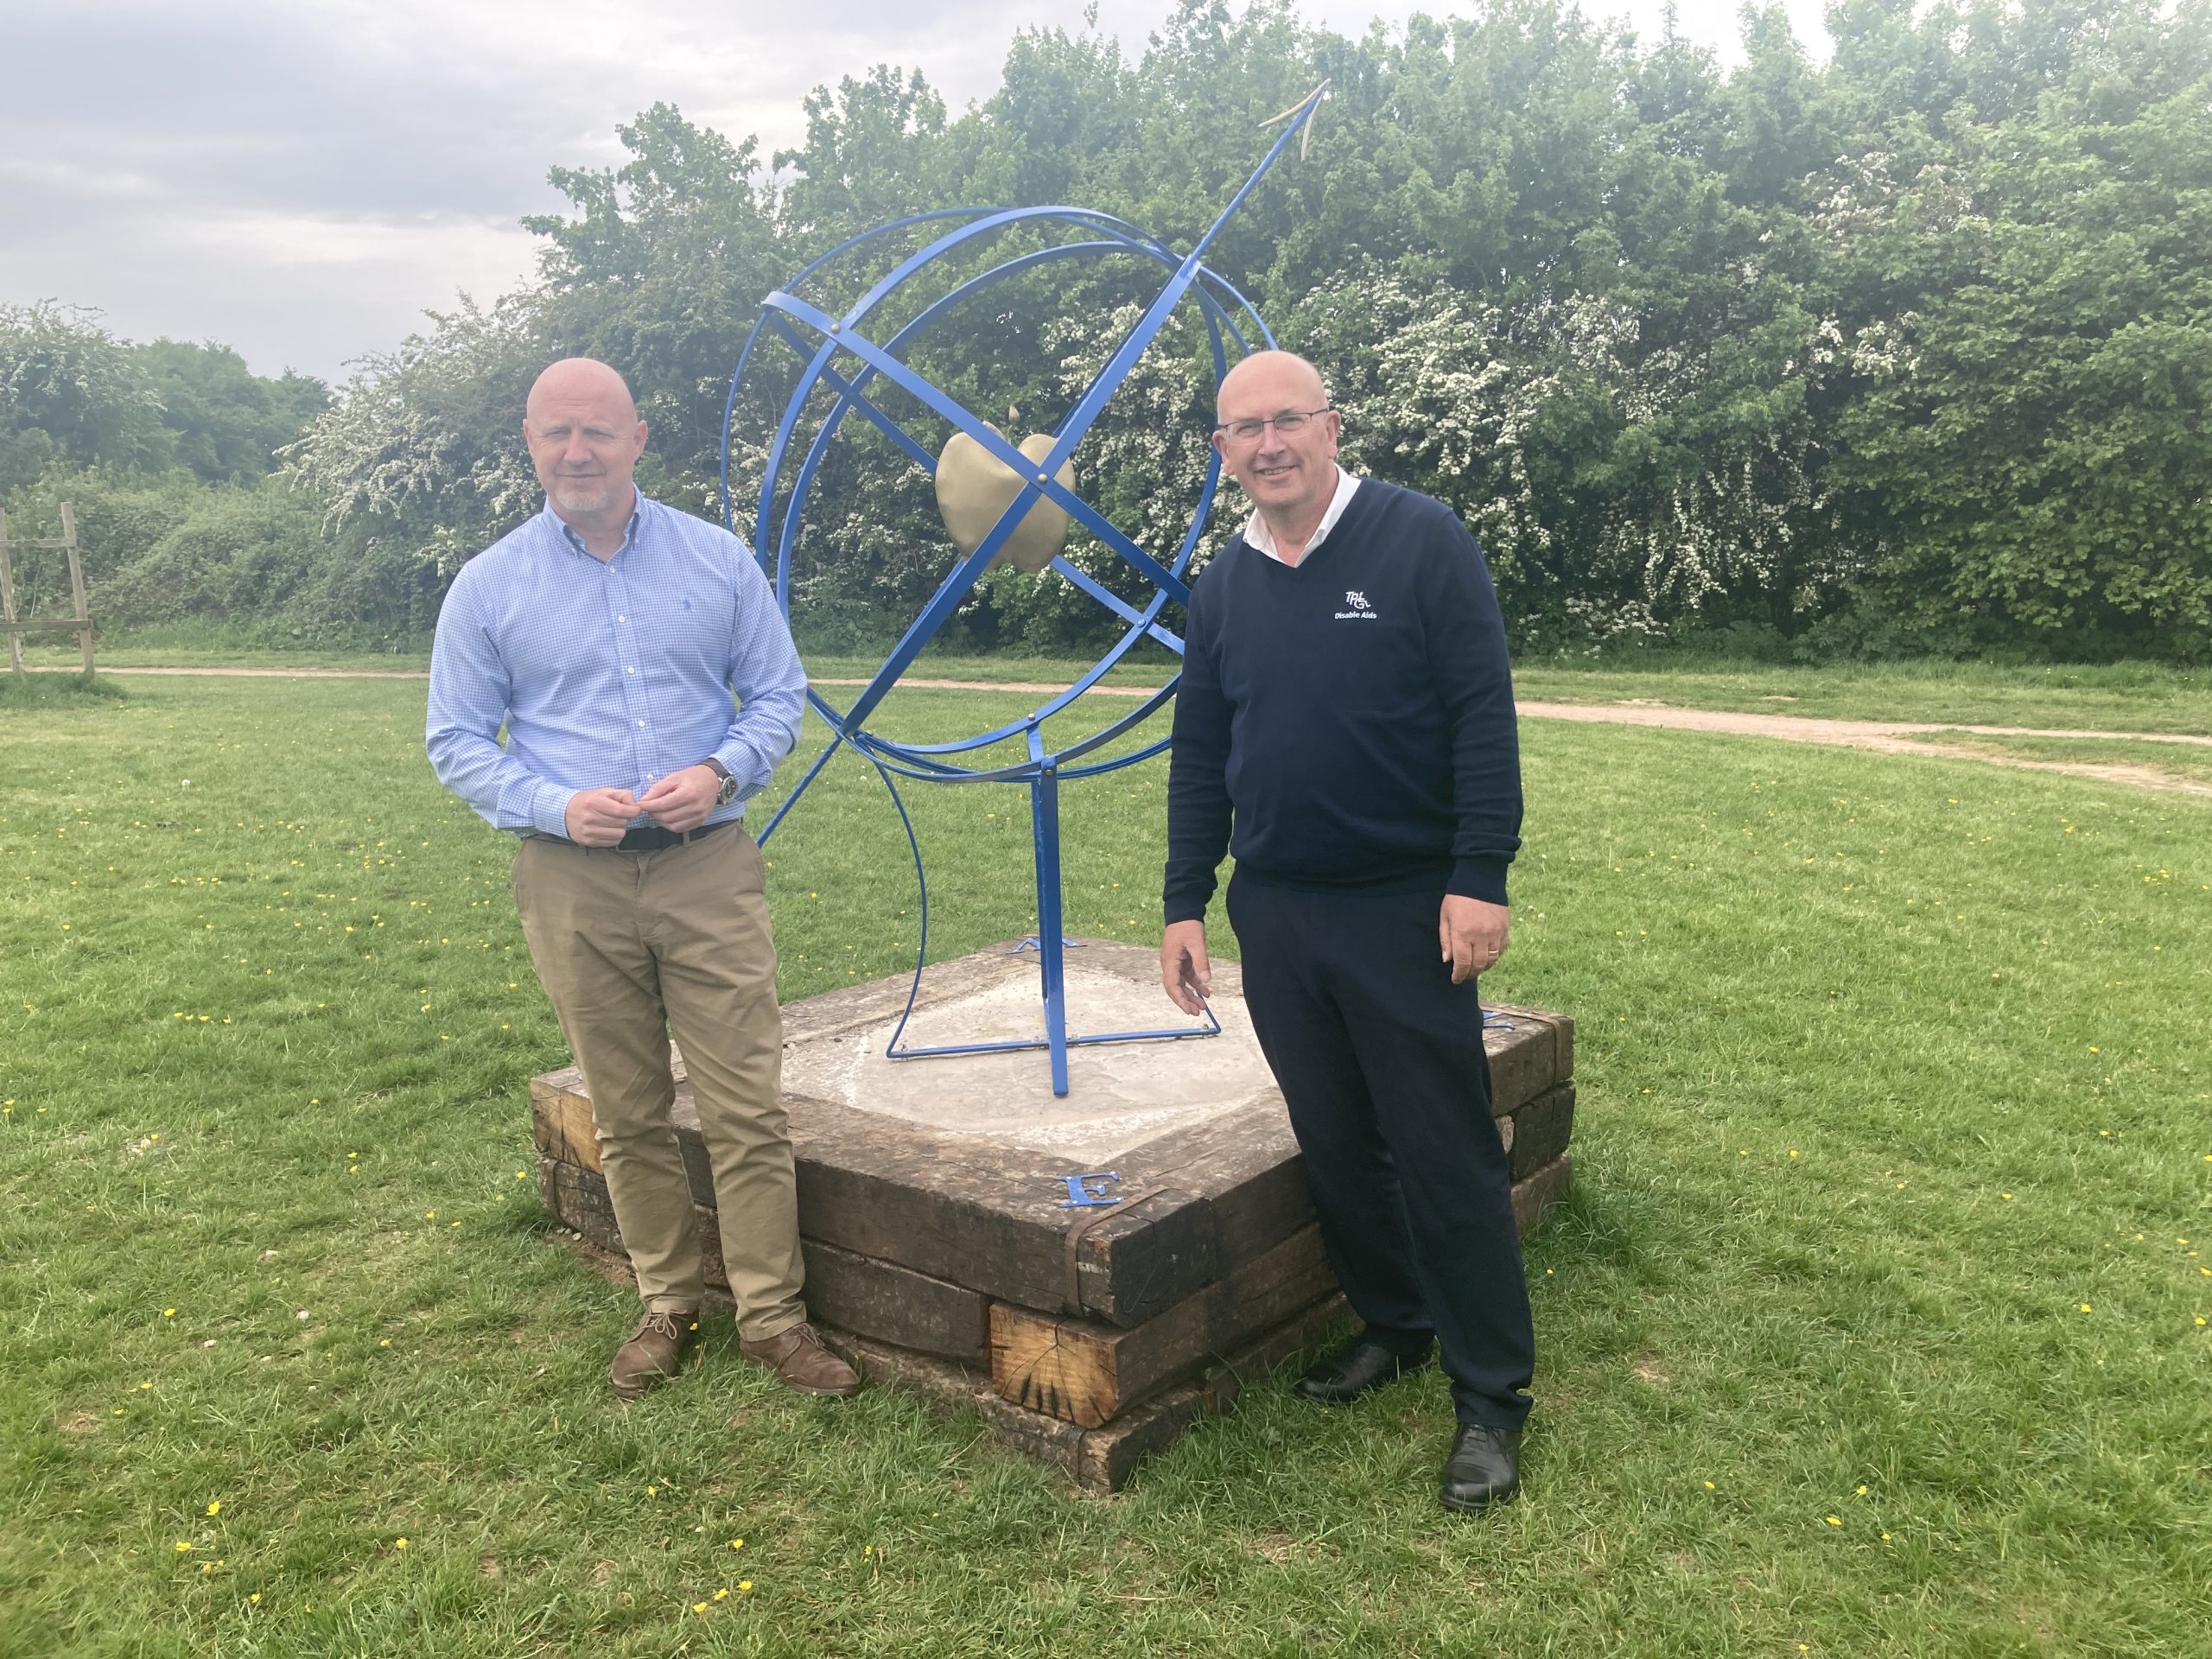 NEWS | Local Insurance Broker the major benefactor in a new sundial at a Hereford park